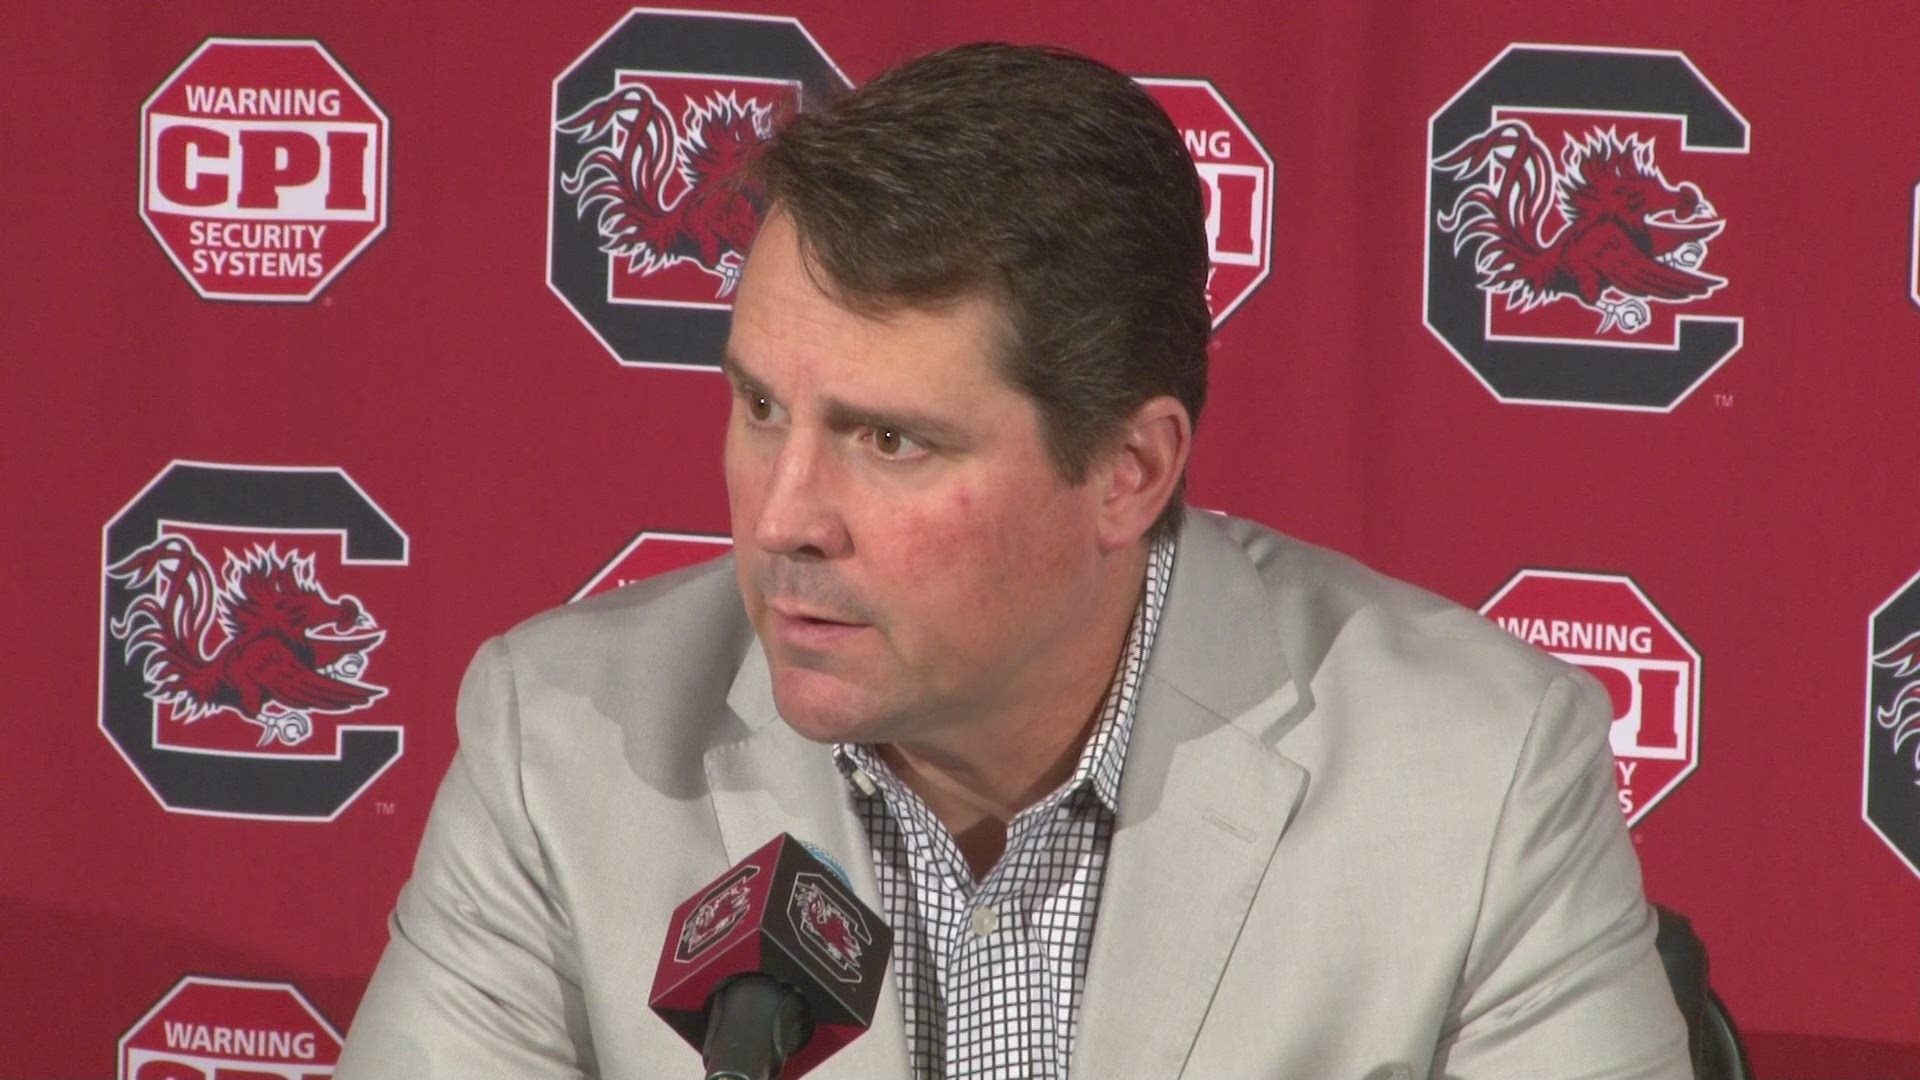 The Gamecocks have an early kickoff in Oxford when they take on Ole Miss but Will Muschamp says USC has the advantage and he's confident in how USC's offense will produce and how his team will handle themselves against the Rebels.